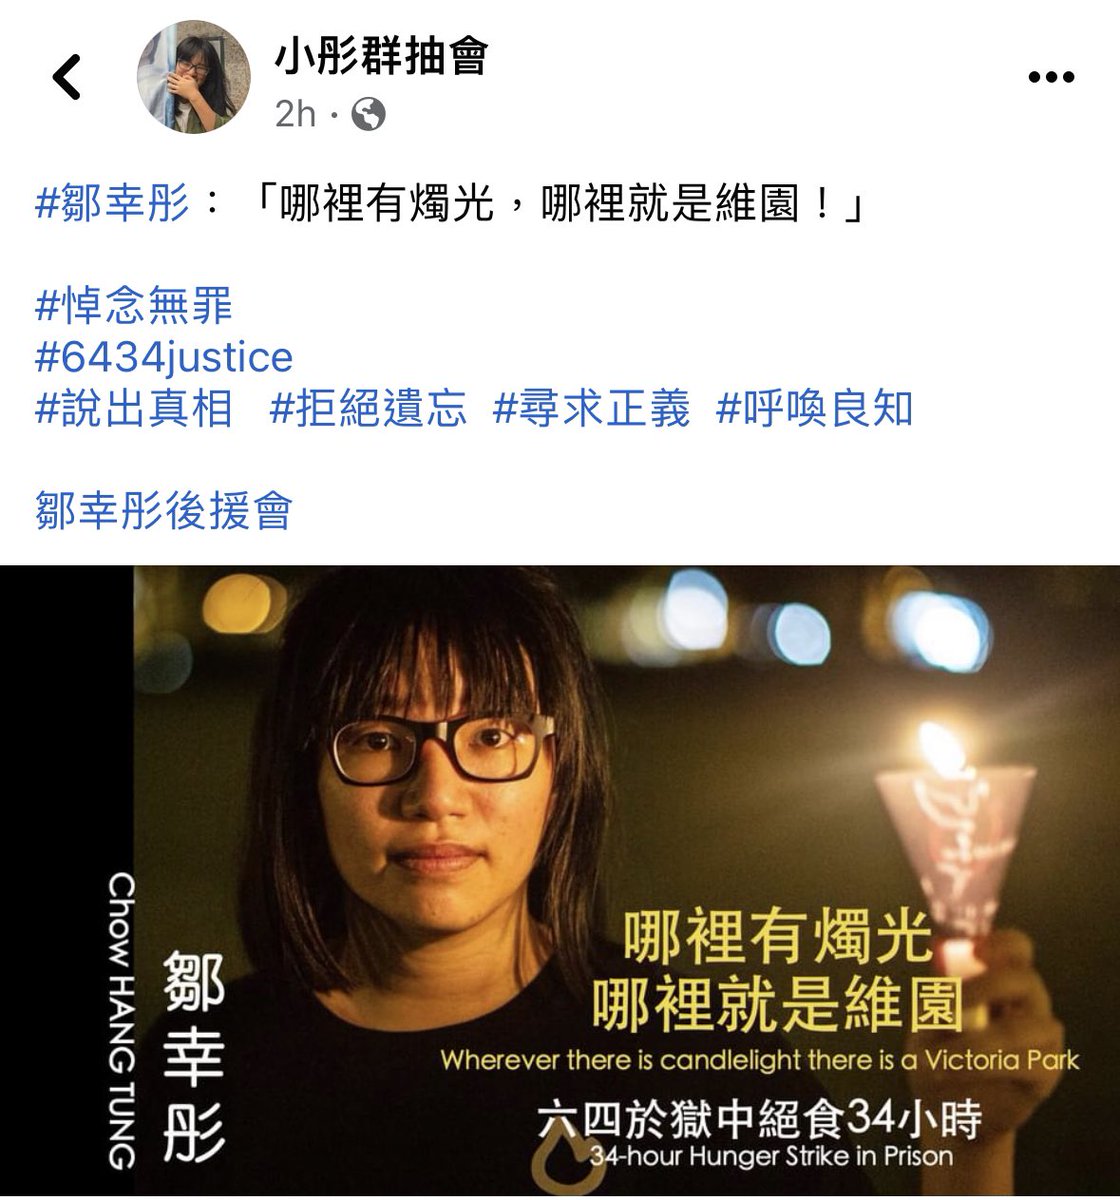 PLEASE SPREAD: Imprisoned #HongKong human right defender and lawyer #ChowHangTung #鄒幸彤 is put under solitary confinement as she goes on a 34-hour long hunger strike today to commemorate the #June4th #TiananmenSquareMassacre. 
'Victoria Park is where candlelight is lit.'